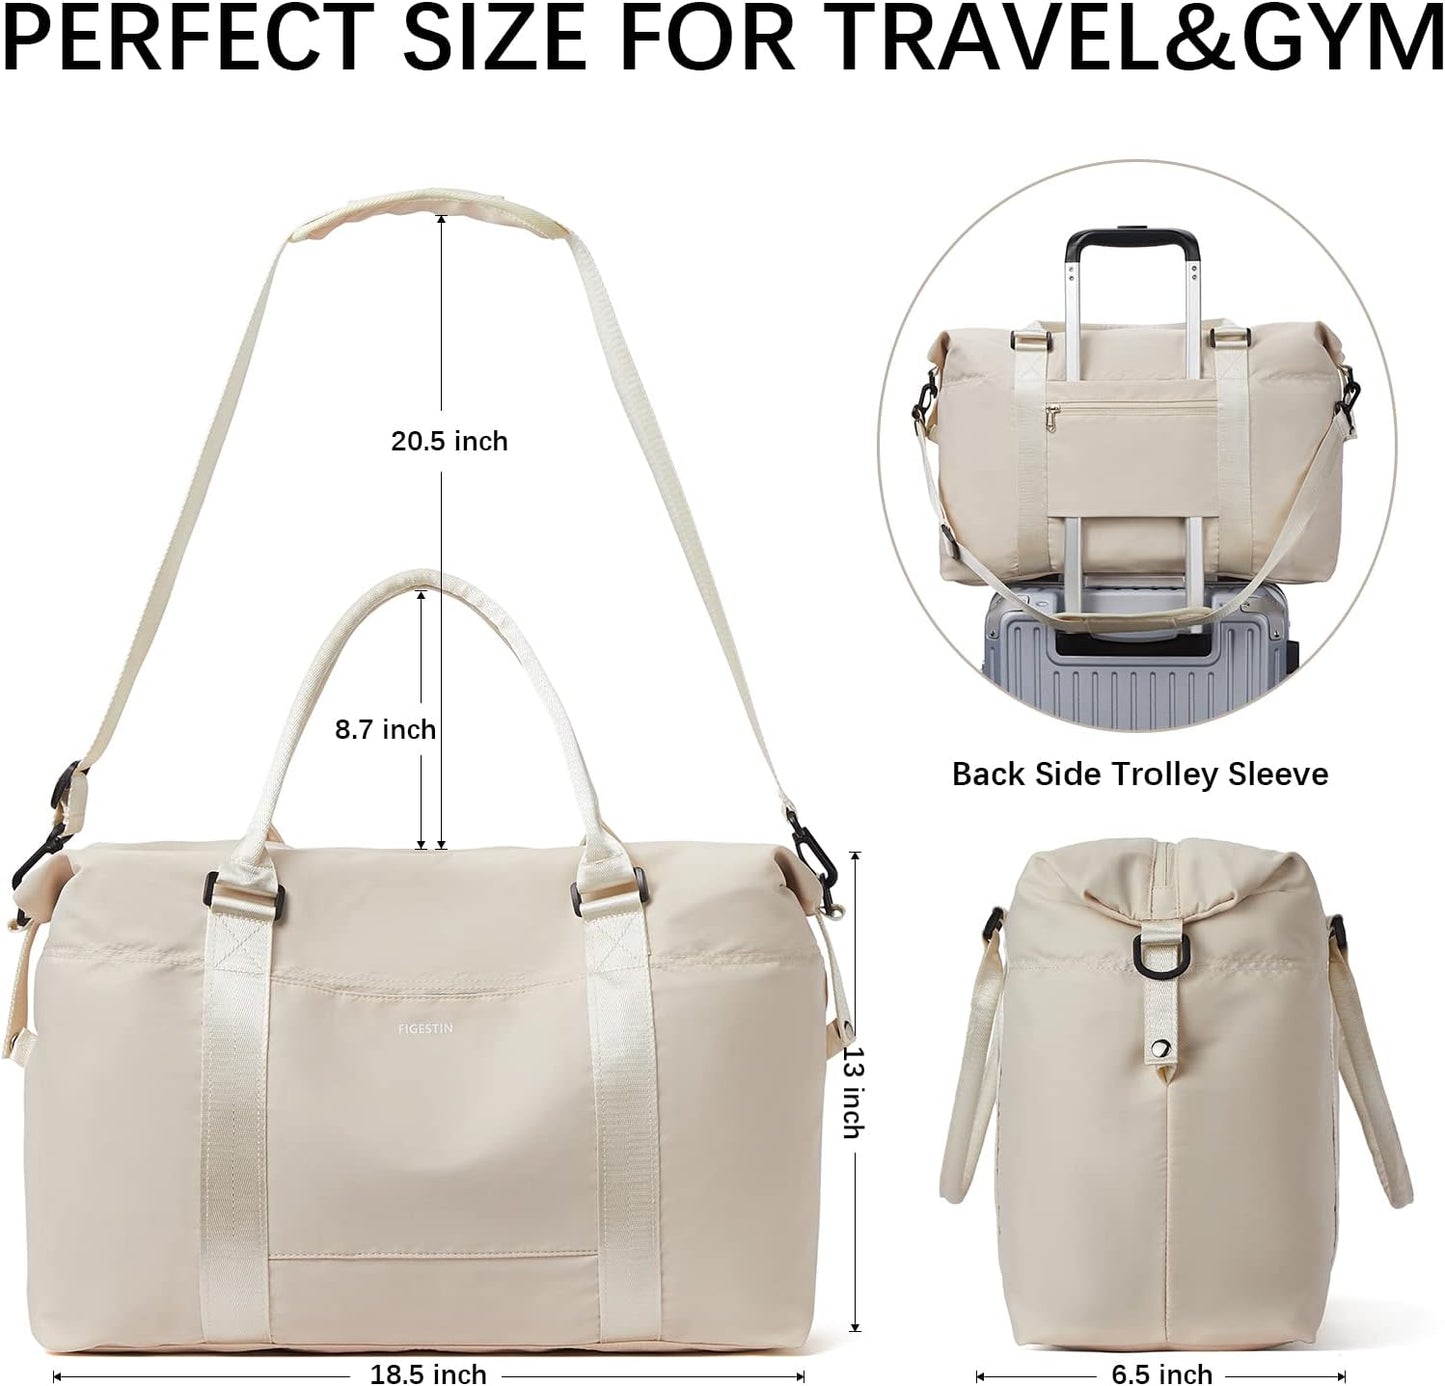 LARGE Duffle Bag Weekender for Women Travel Tote Lightweight Carry On Overnight Girls Beige